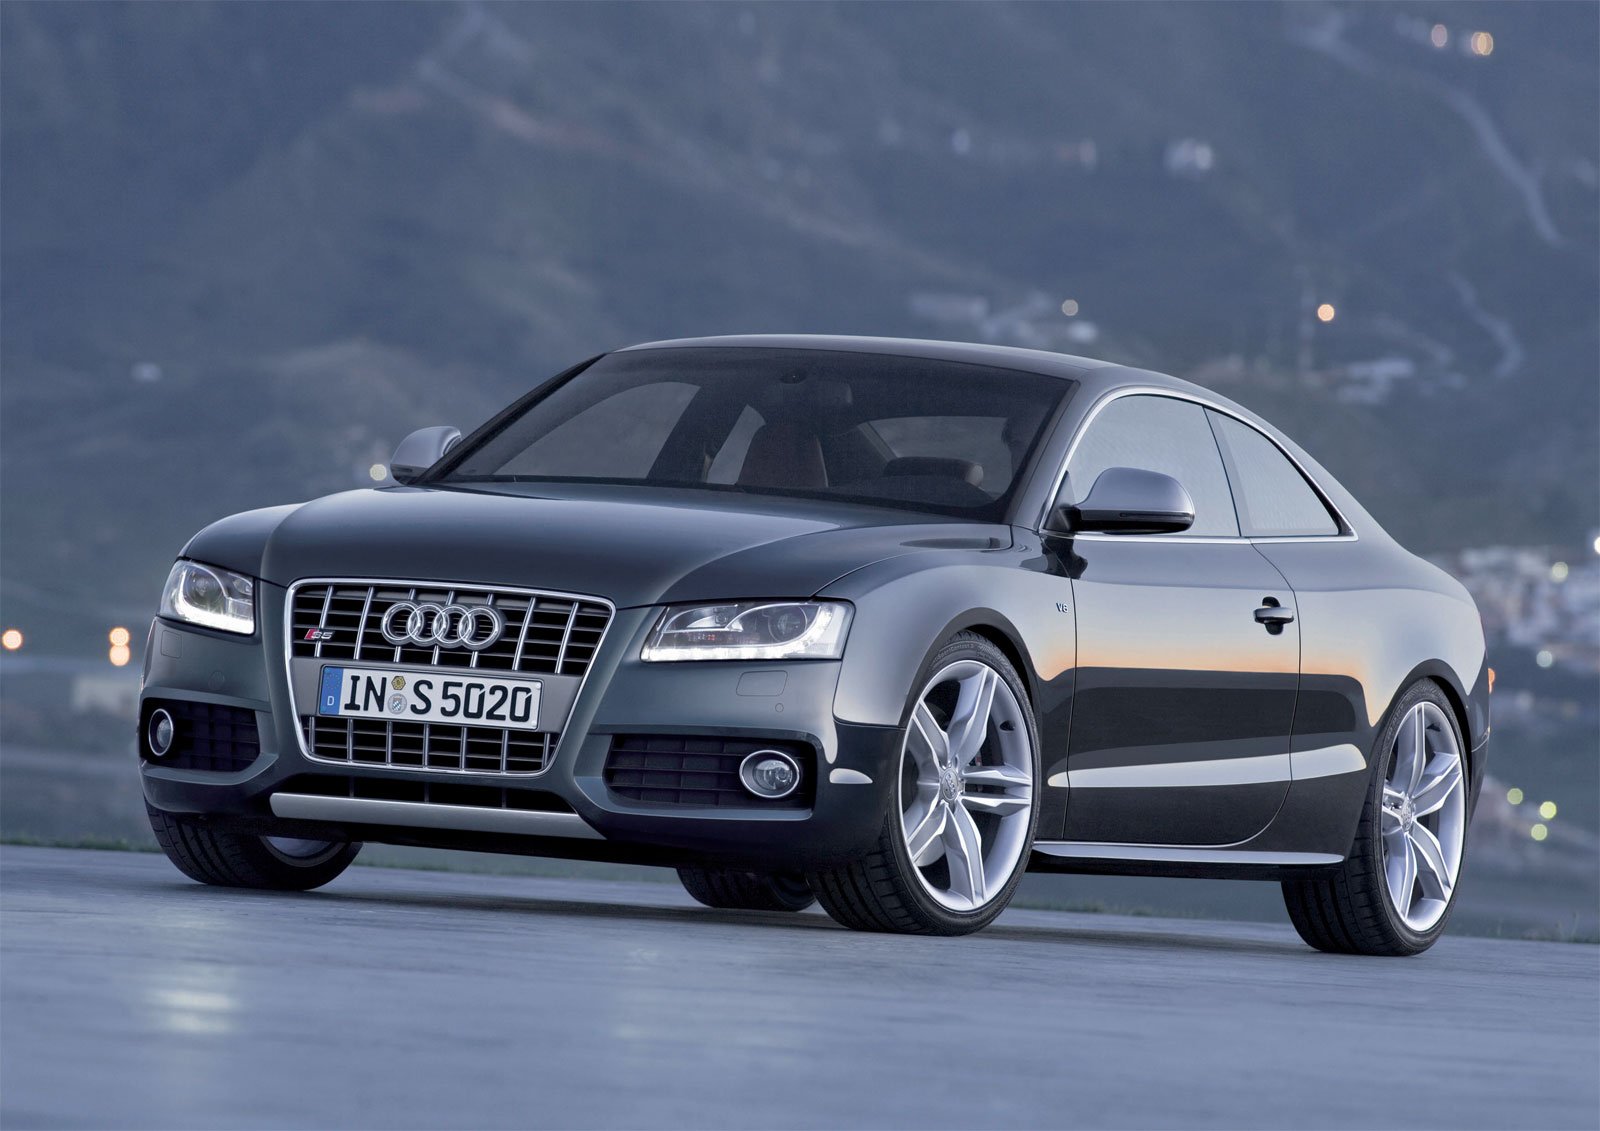 ... S5 HD WallPaperS Best High Quality Car Desktop Wallpapers in HD Form